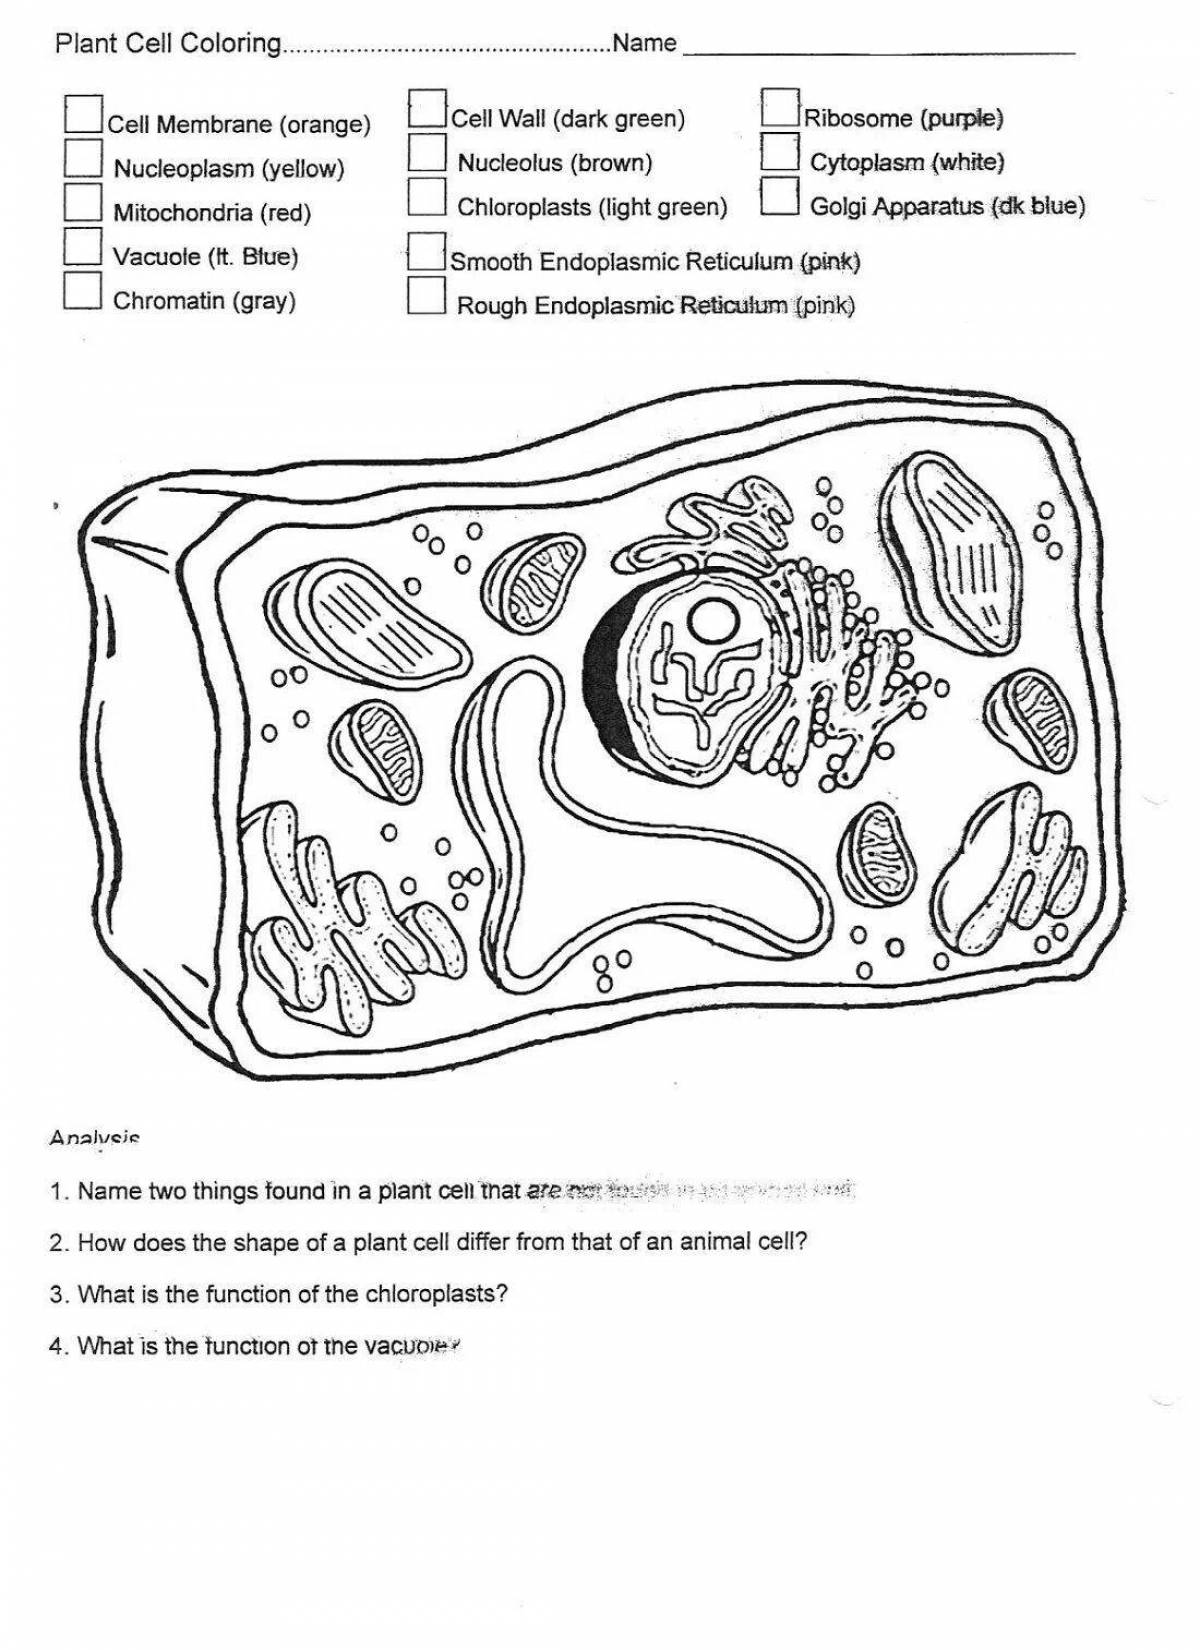 Animated plant cell coloring page